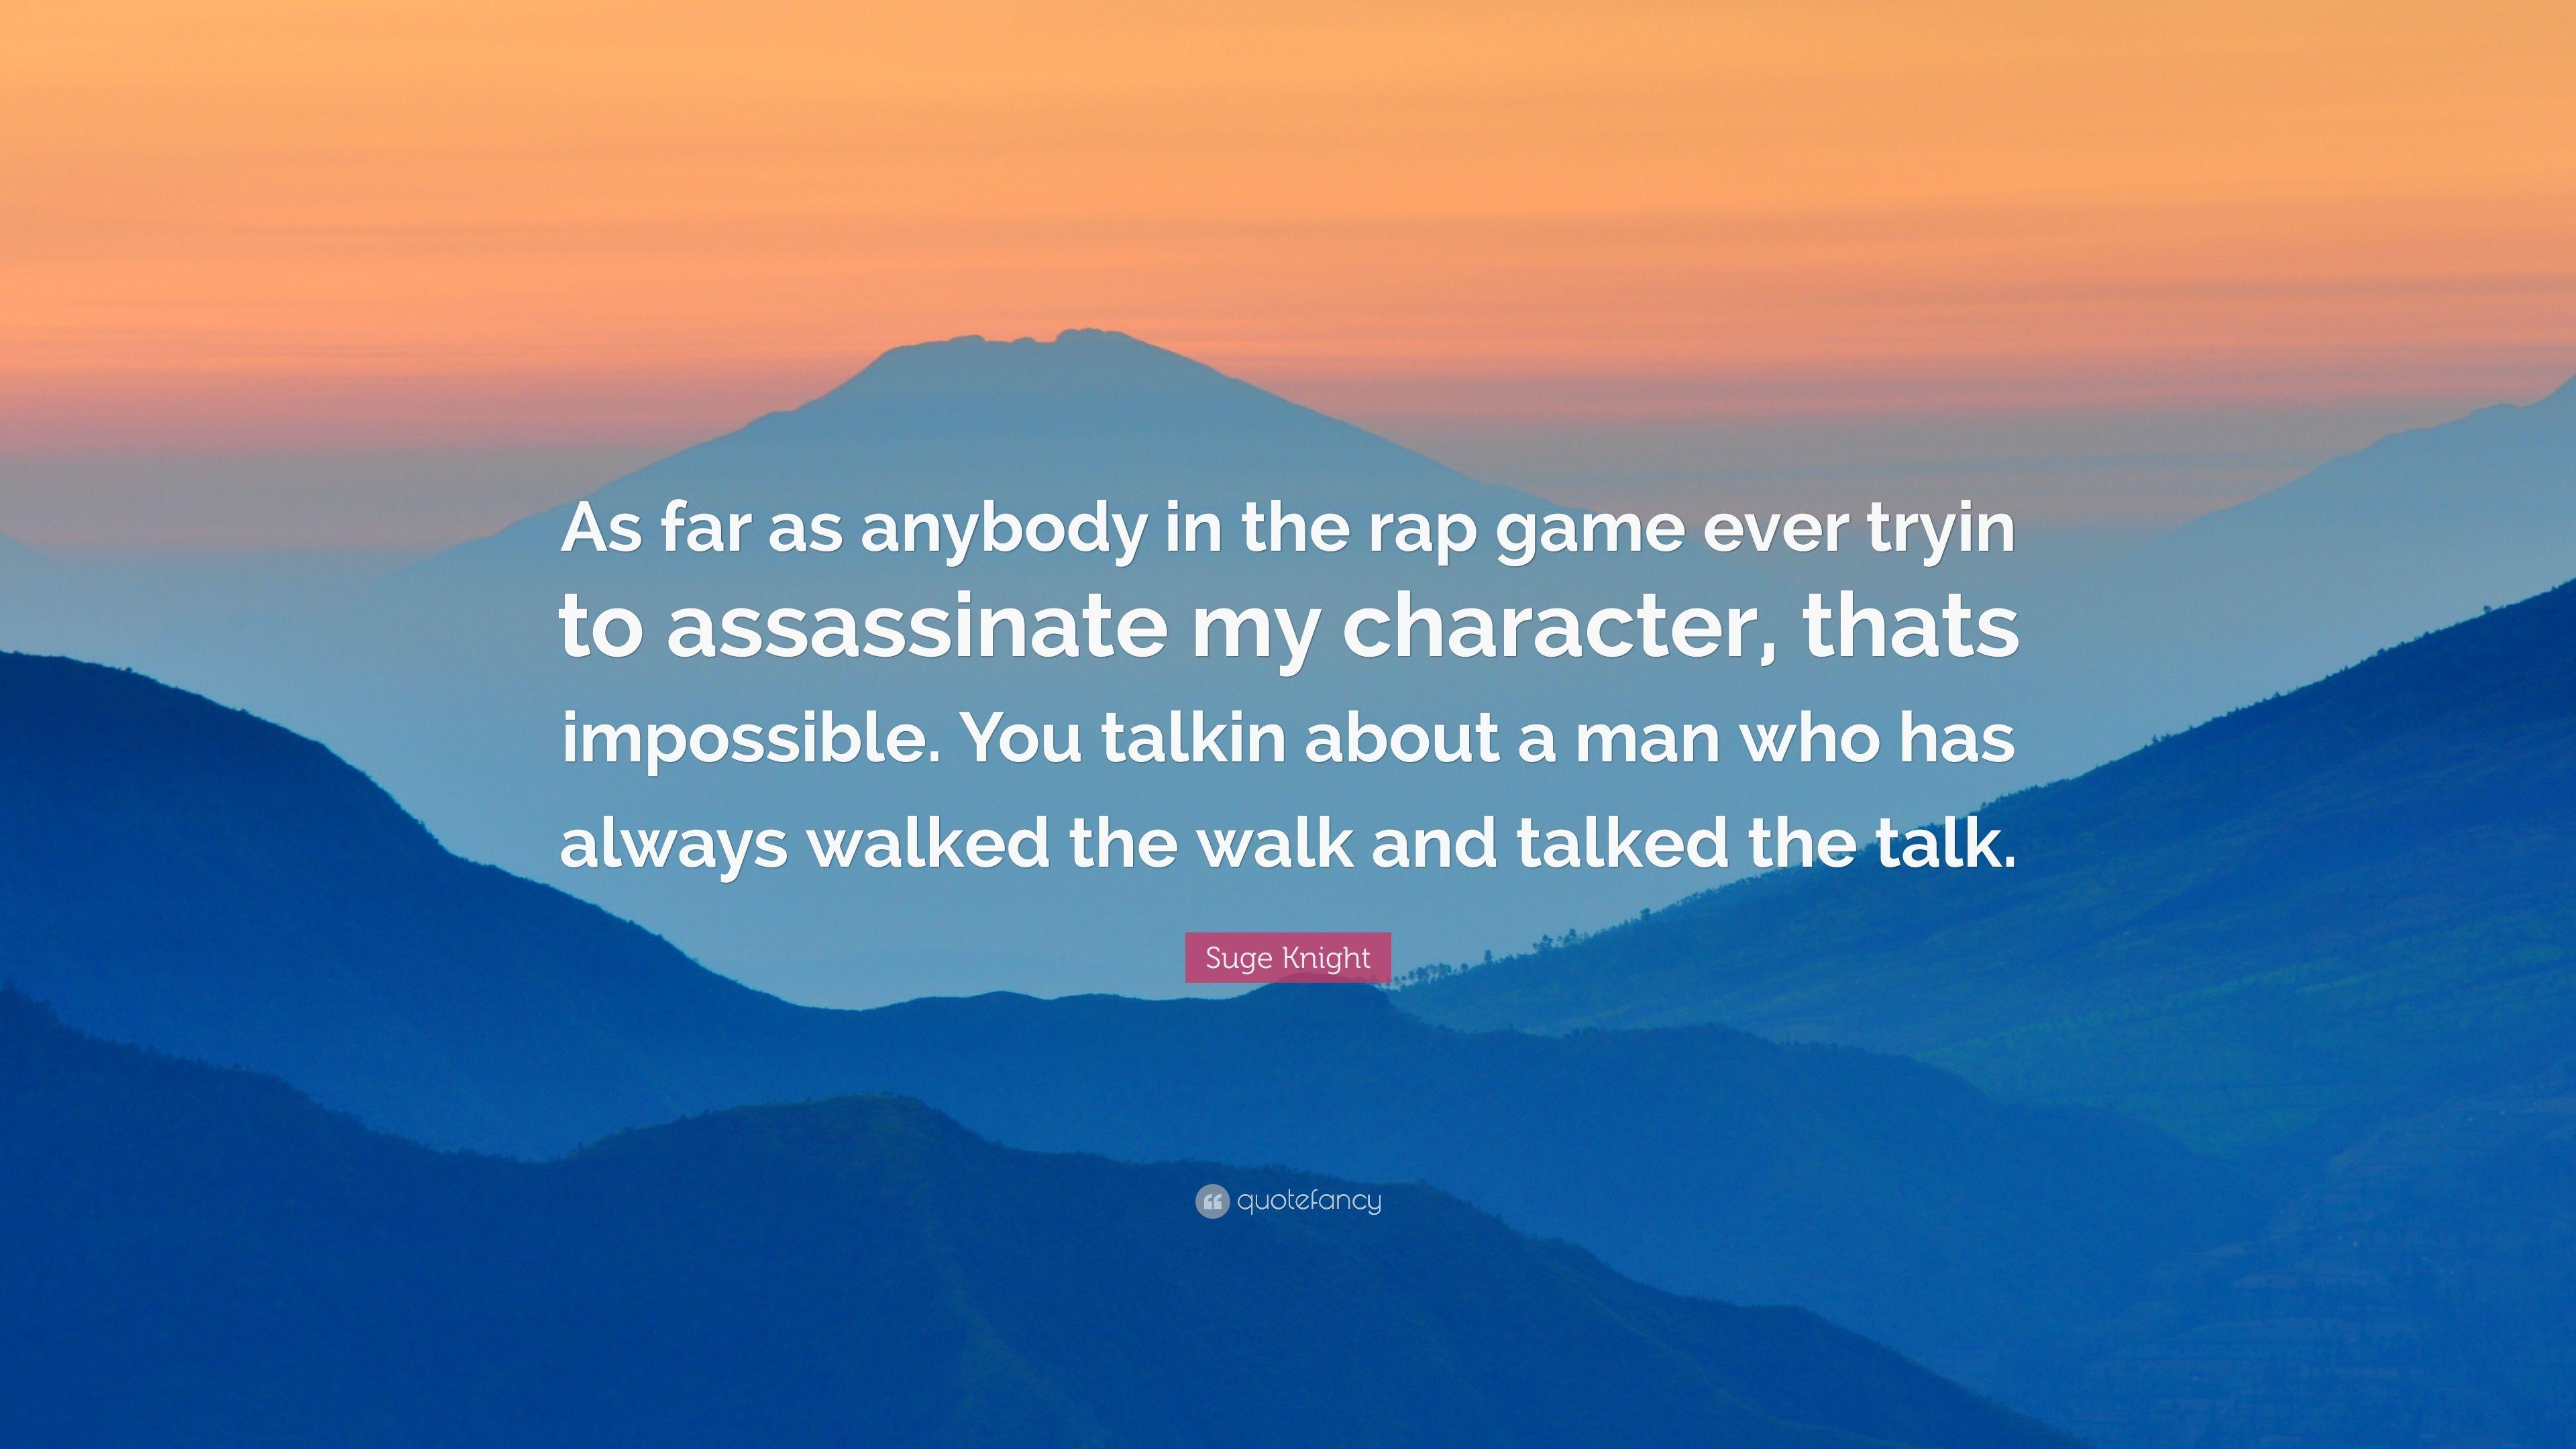 Suge Knight Quote: “As far as anybody in the rap game ever tryin to